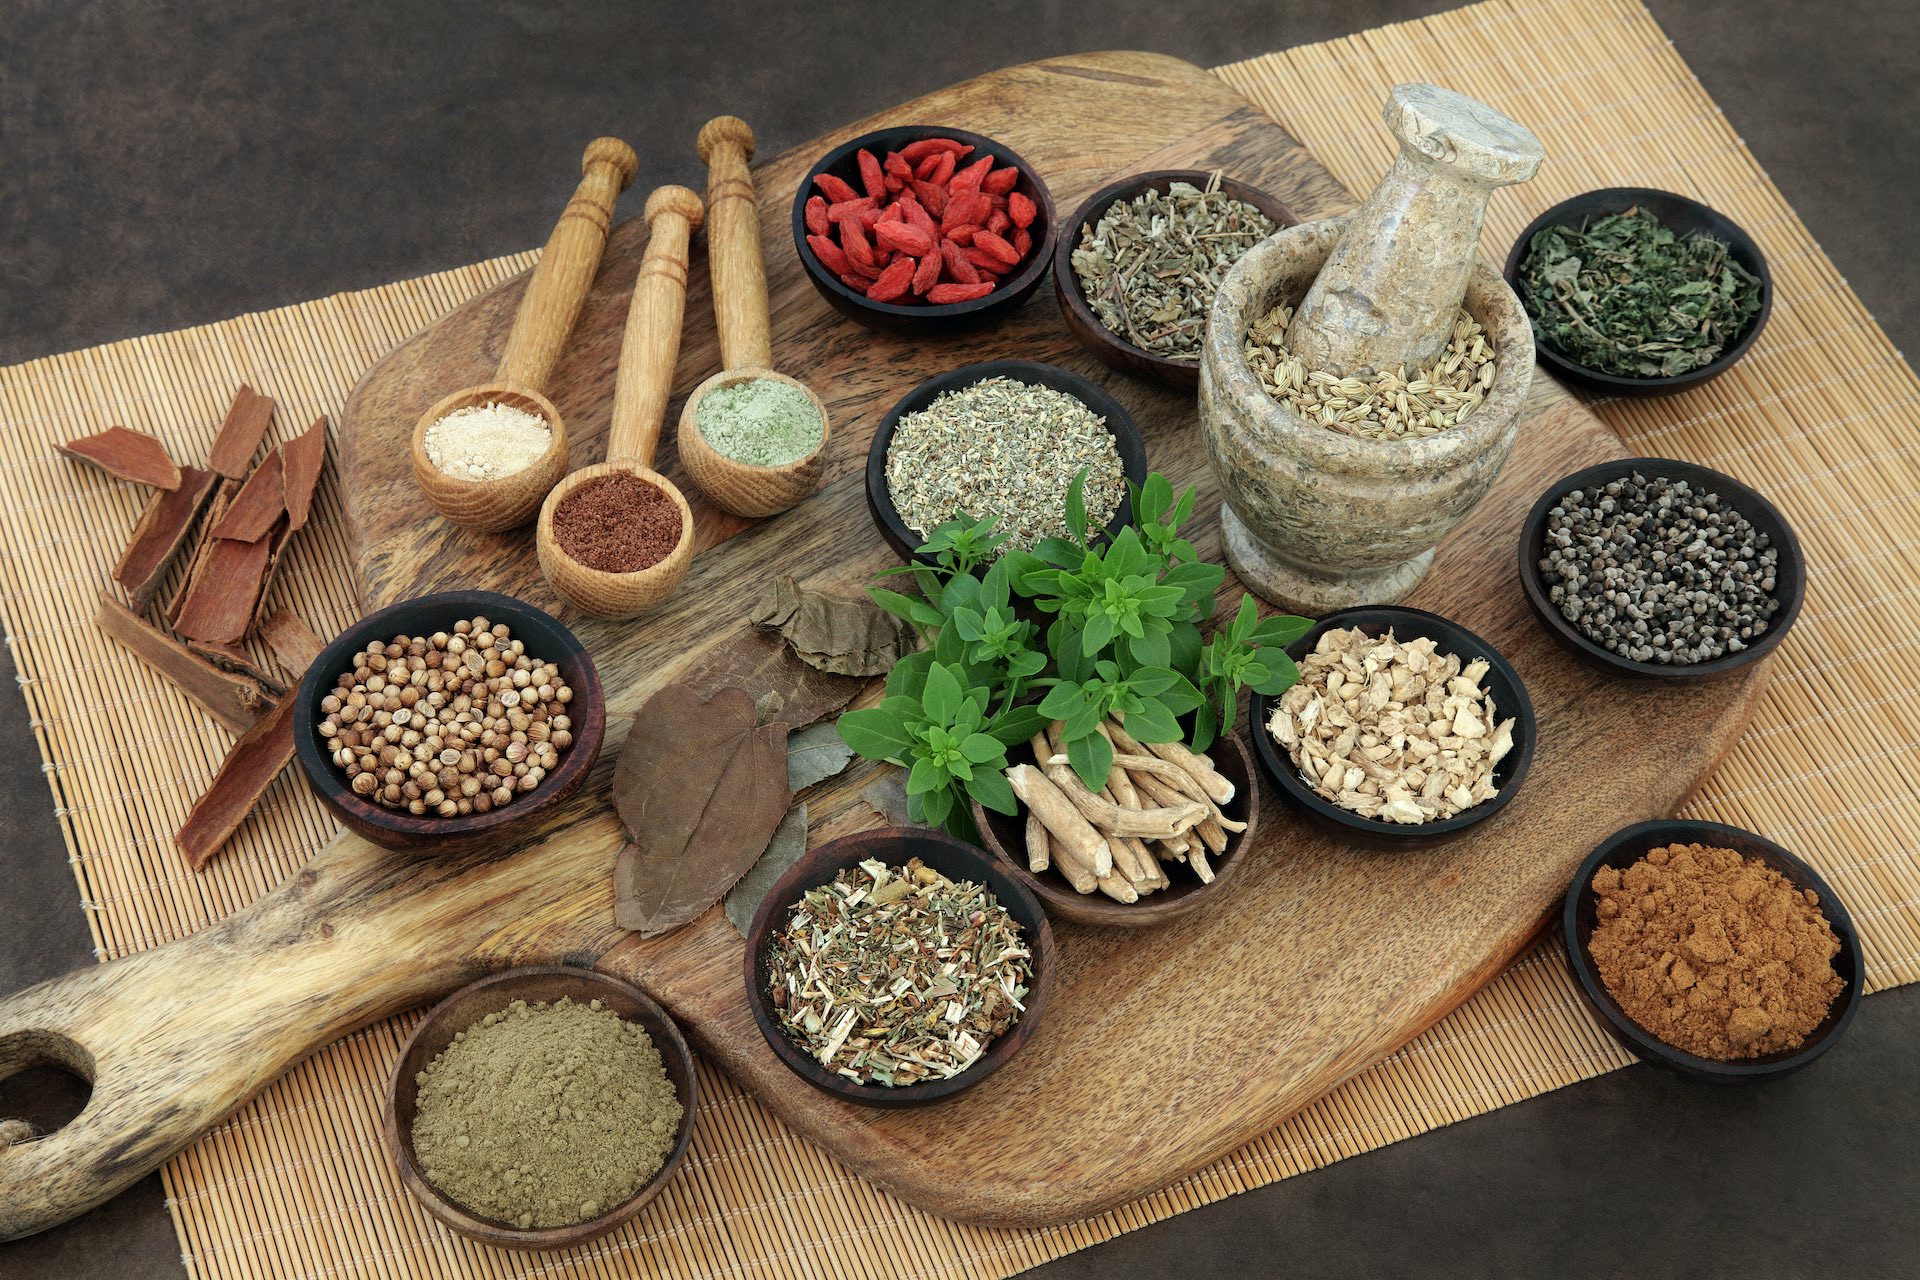 Herb and spice health food